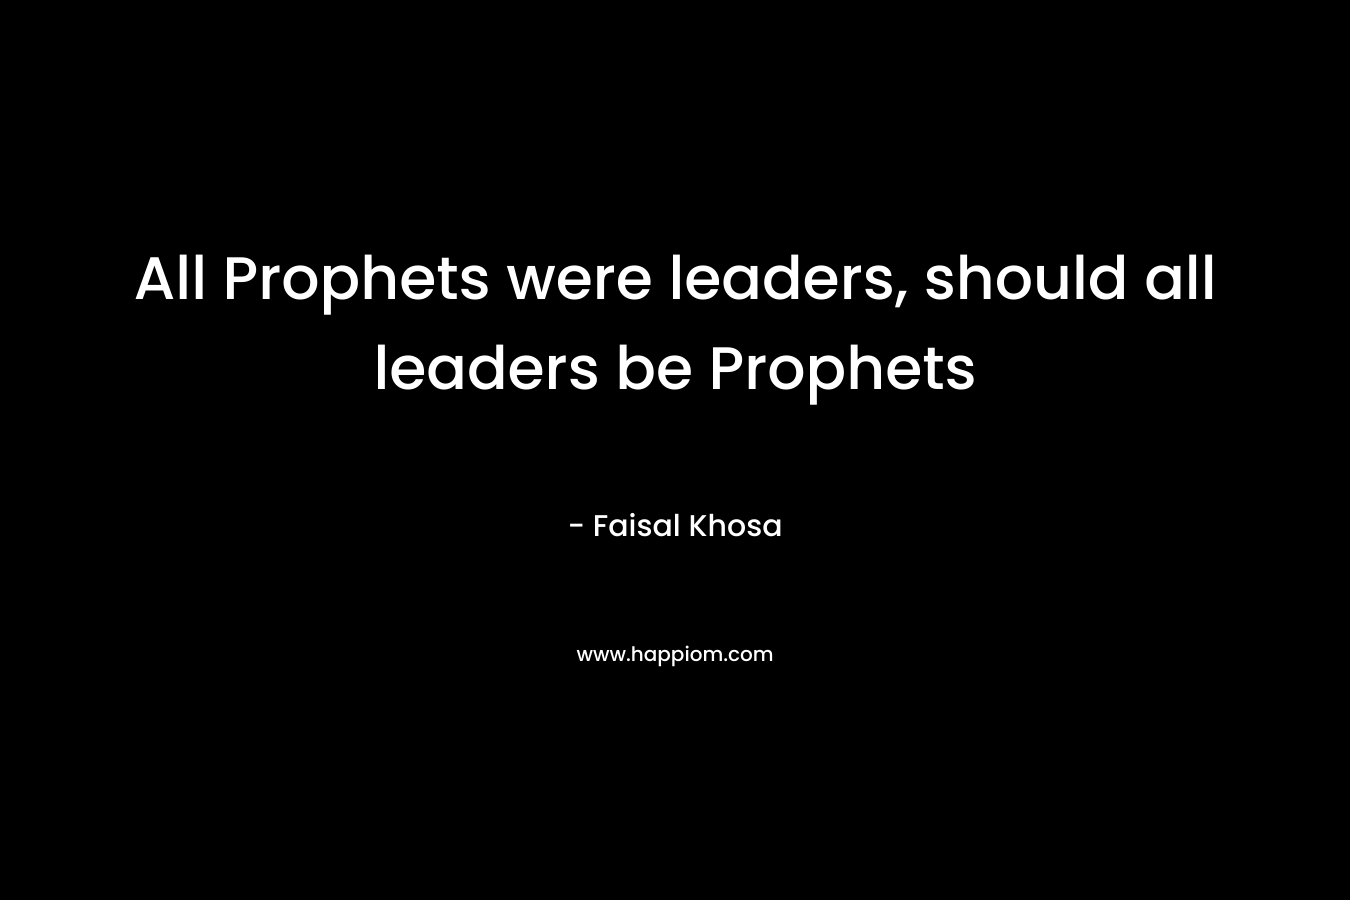 All Prophets were leaders, should all leaders be Prophets